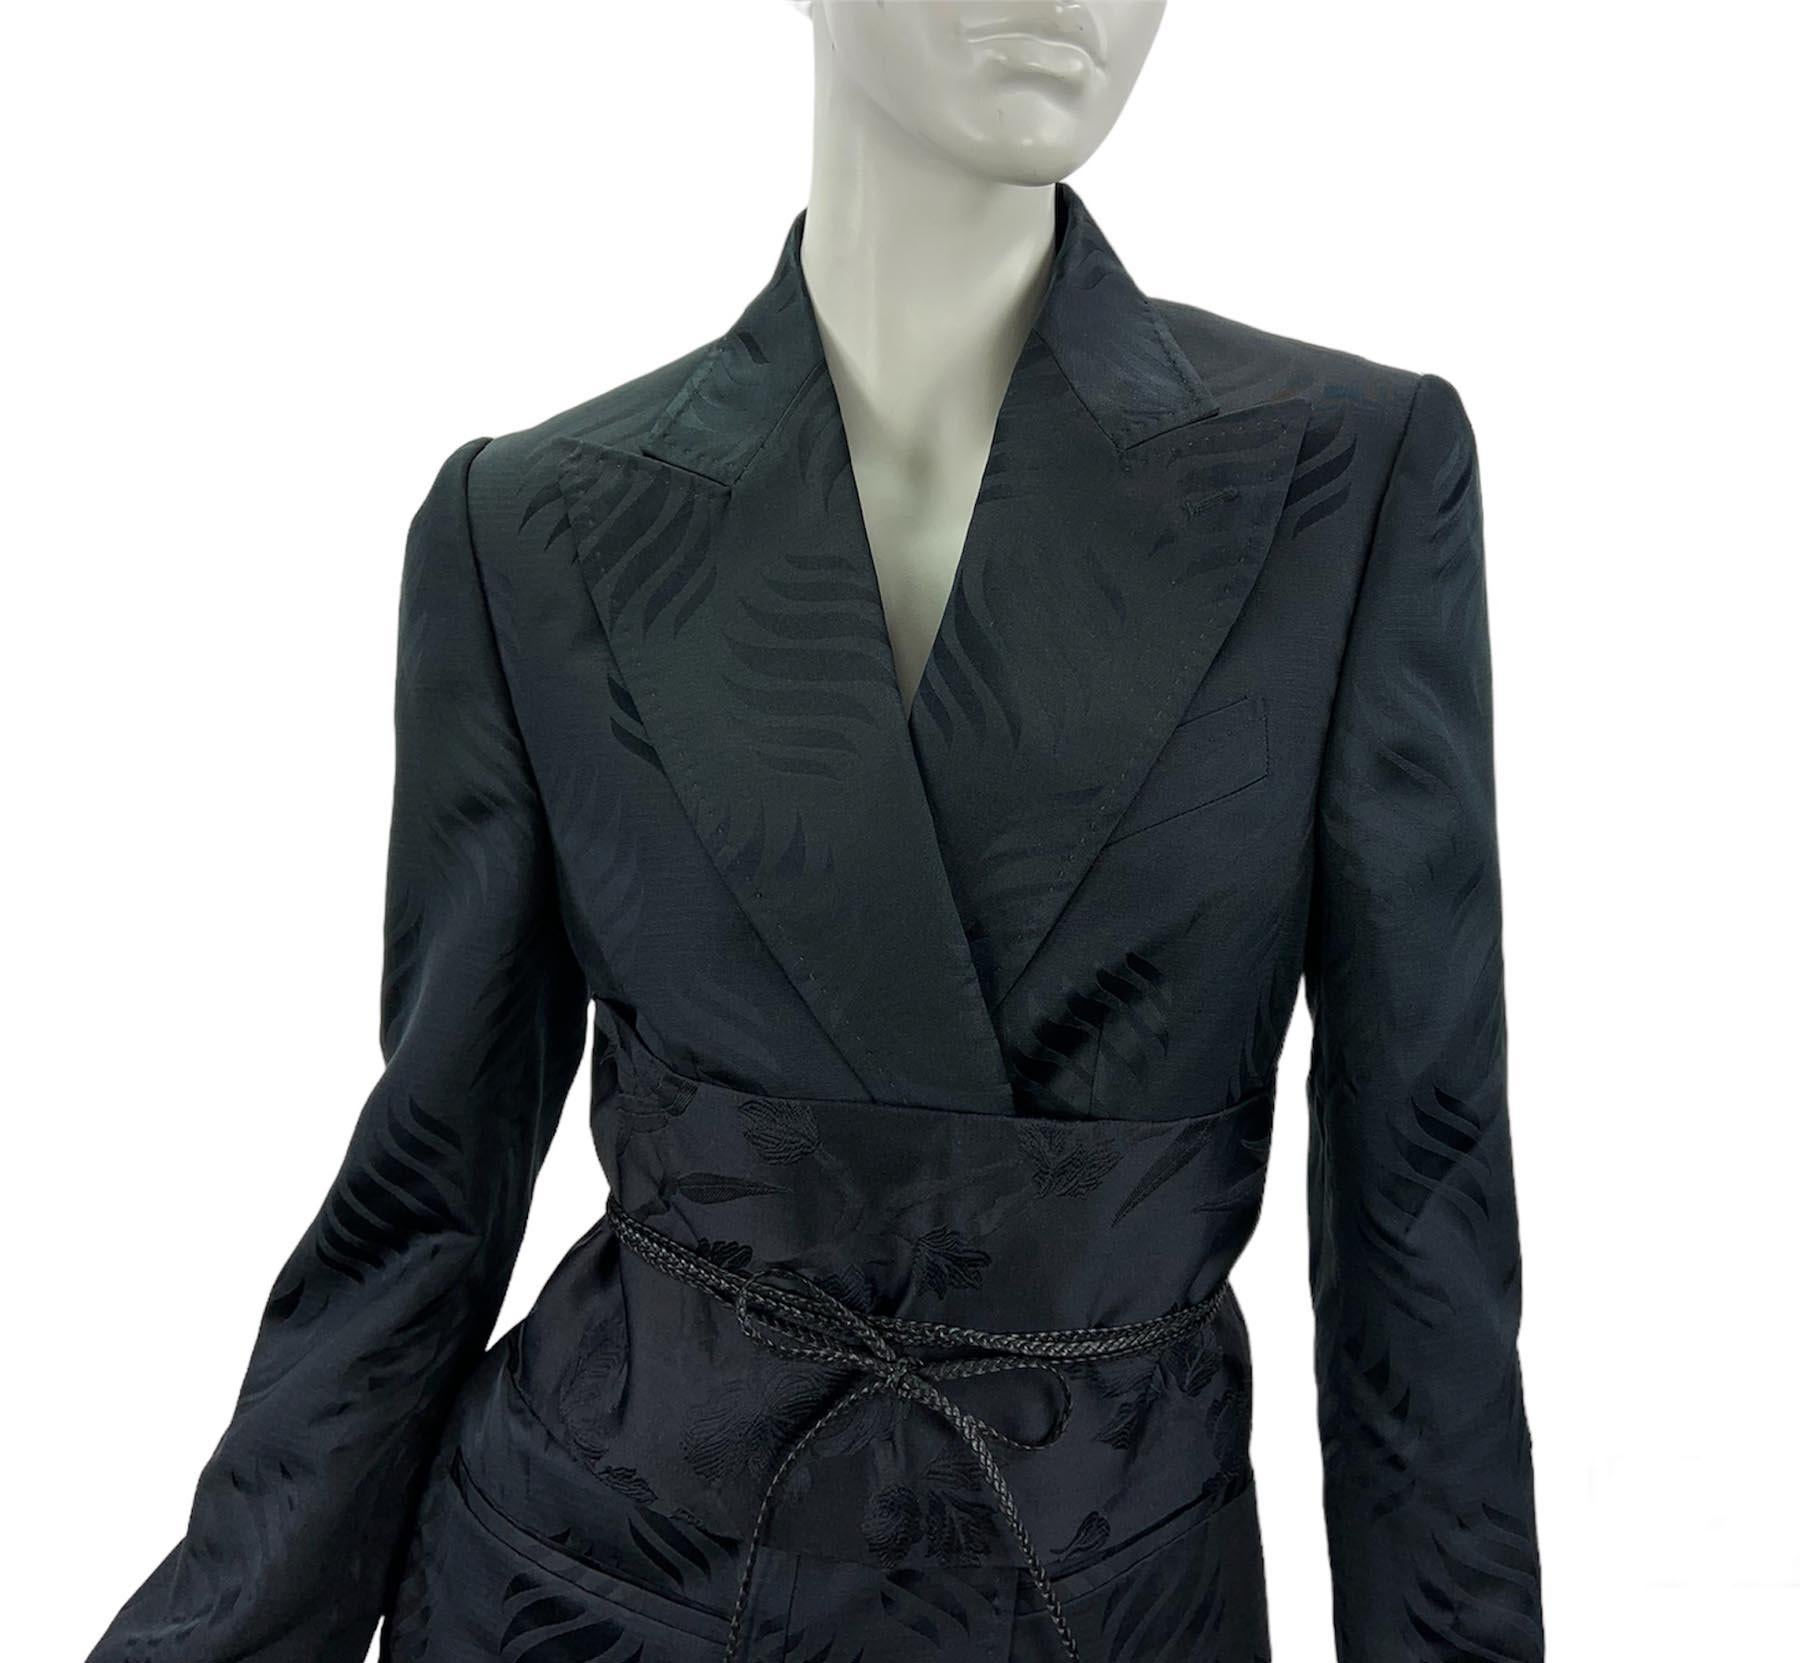 Tom Ford for Gucci Runway Silk Kimono Jacket Blazer with Matching Obi Belt
F/W 2002 Runway Collection
Italian size 44 - US 8
100% Silk, Black Color, 3 Front Pockets, 3 Inner Pockets, Matching Silk Obi Belt with Braided Leather Ties, Open Style,